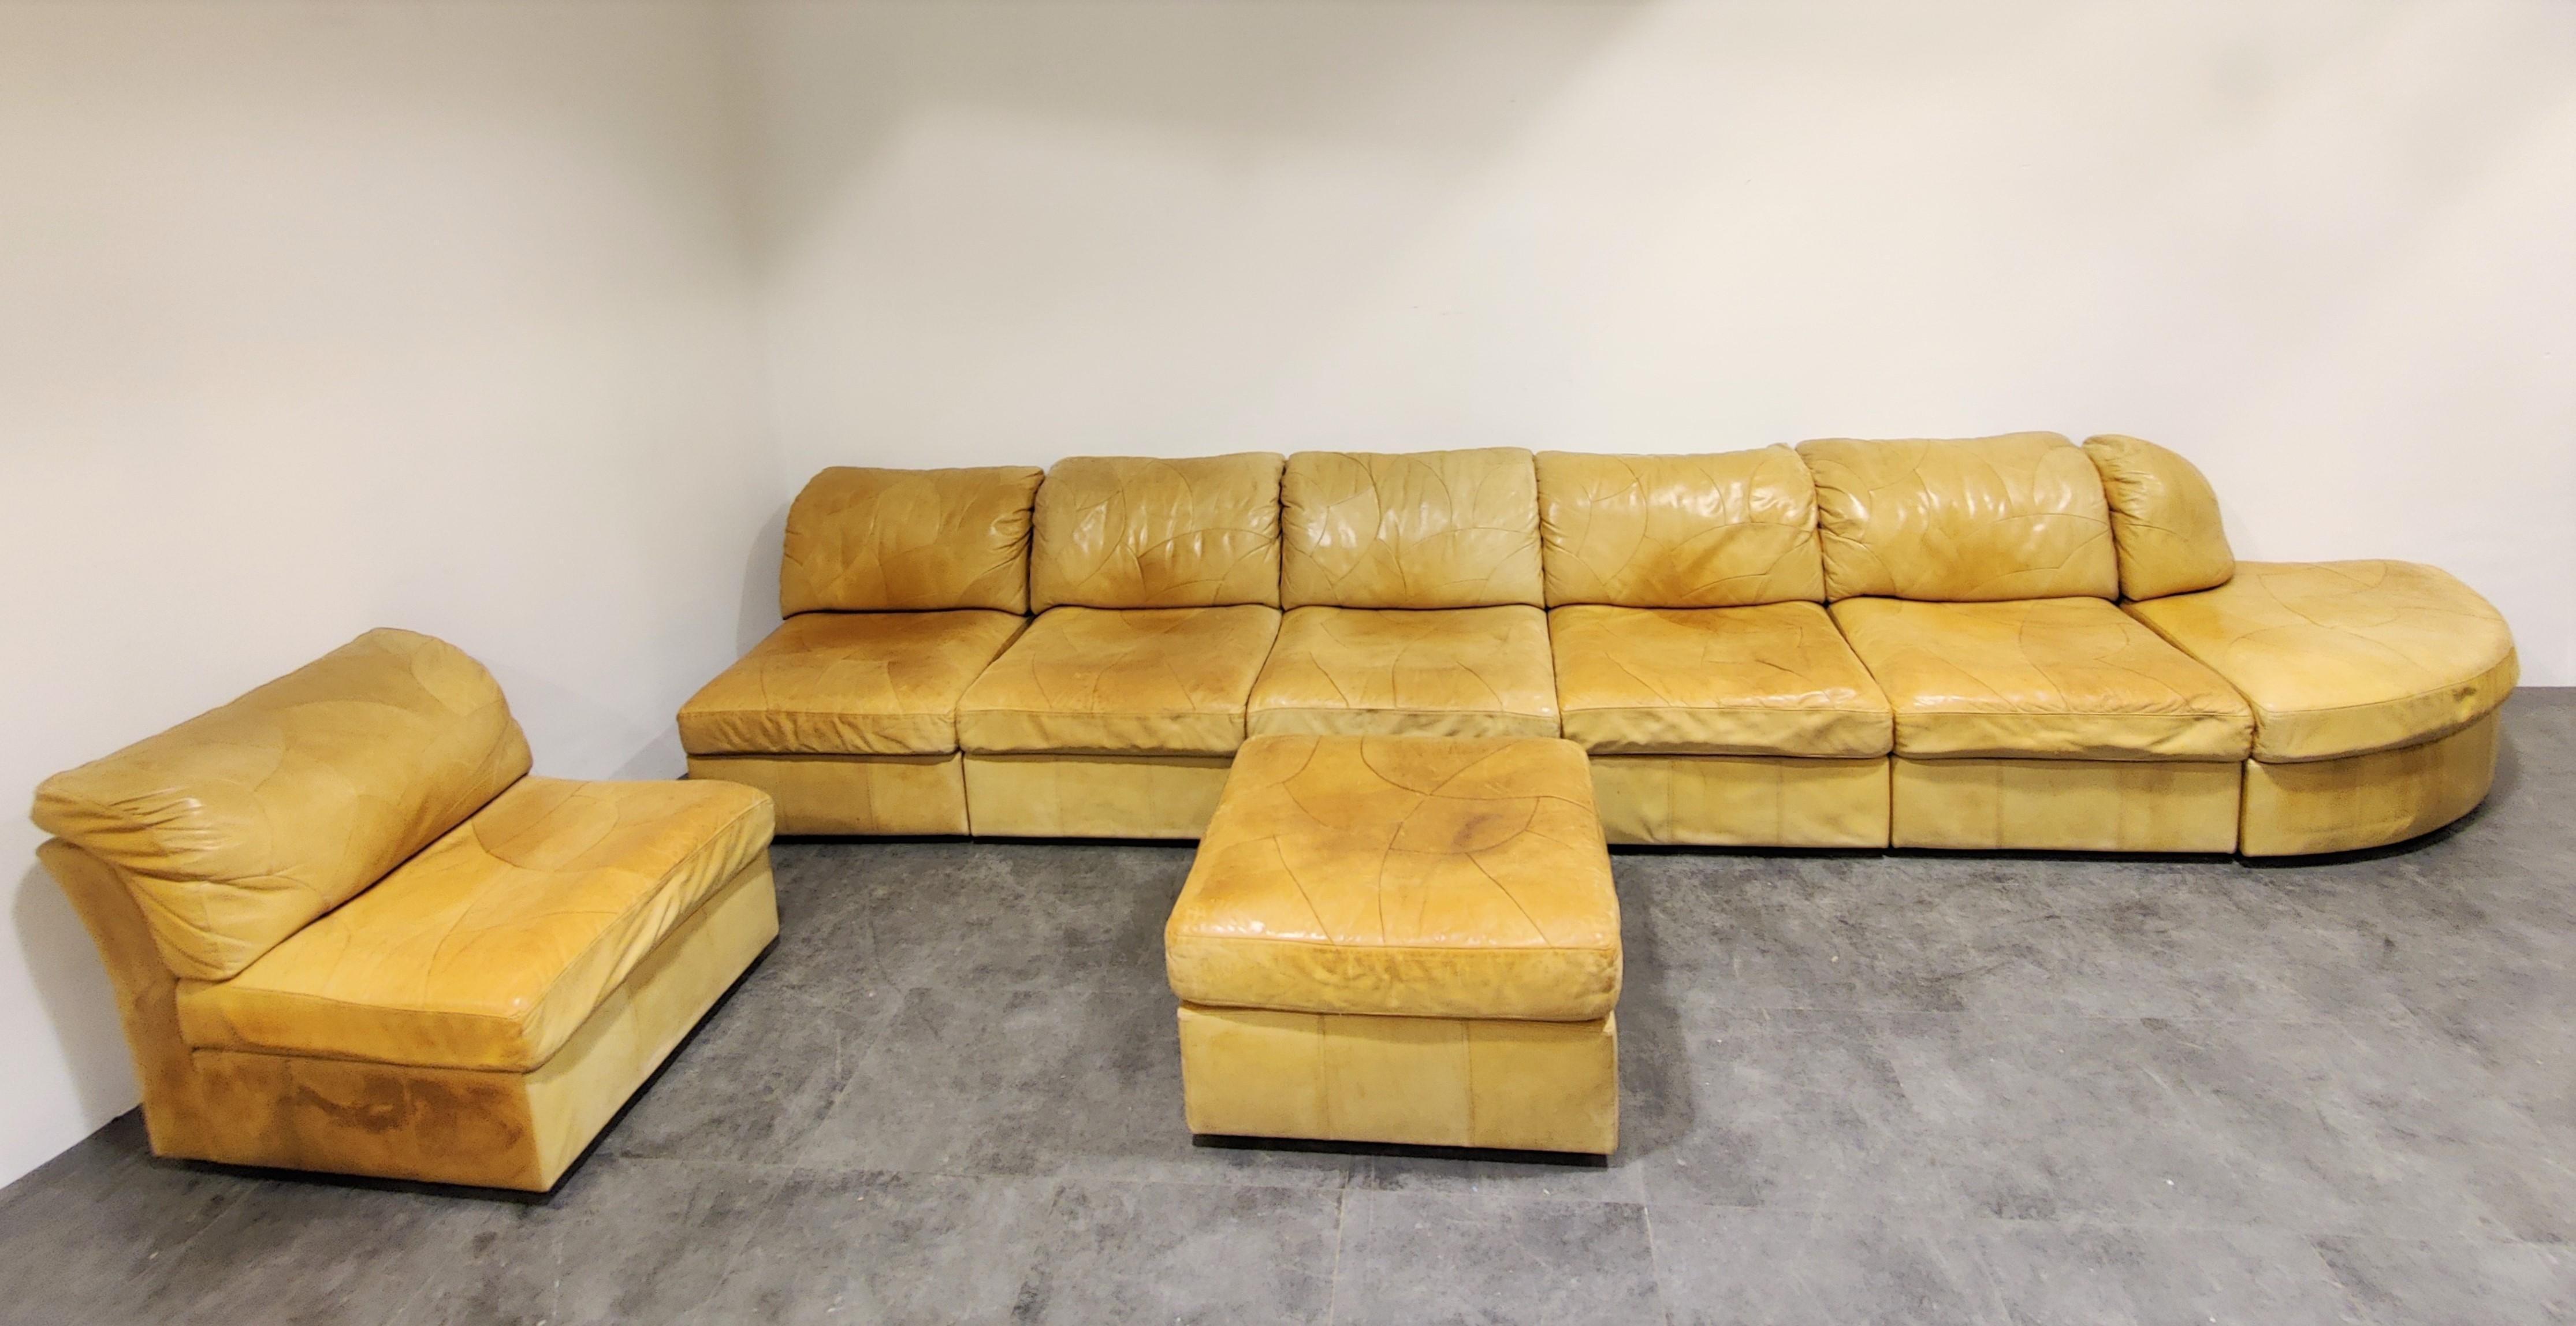 Stunning sectional/modular sofa set in beautifully patinated beige leather by Laauser, Germany.

The sofa set is completely modular and consists of 7 elements and an ottoman.

Ideal piece to create a free standing sofa space which will be the